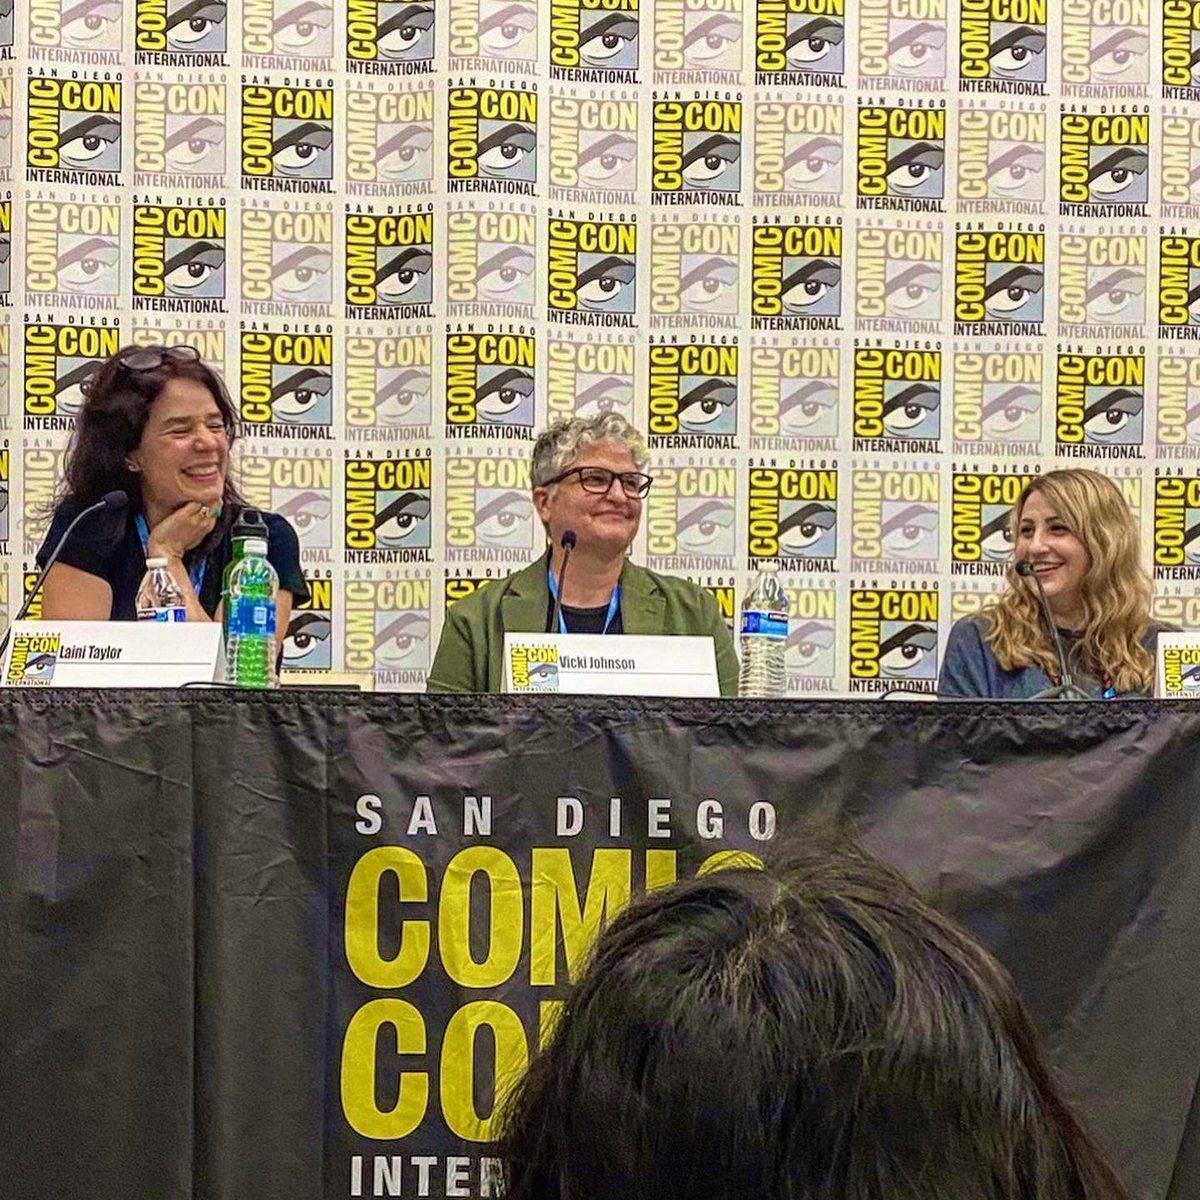 I survived my first @Comic_Con panel and signing! Thanks to the kind and welcoming panelists and moderator, and to @MystGalaxyBooks for organizing. we had a great convo about strong protagonists like Molly! #MollysTuxedo @littlebeebooks @glaad @gillianimation